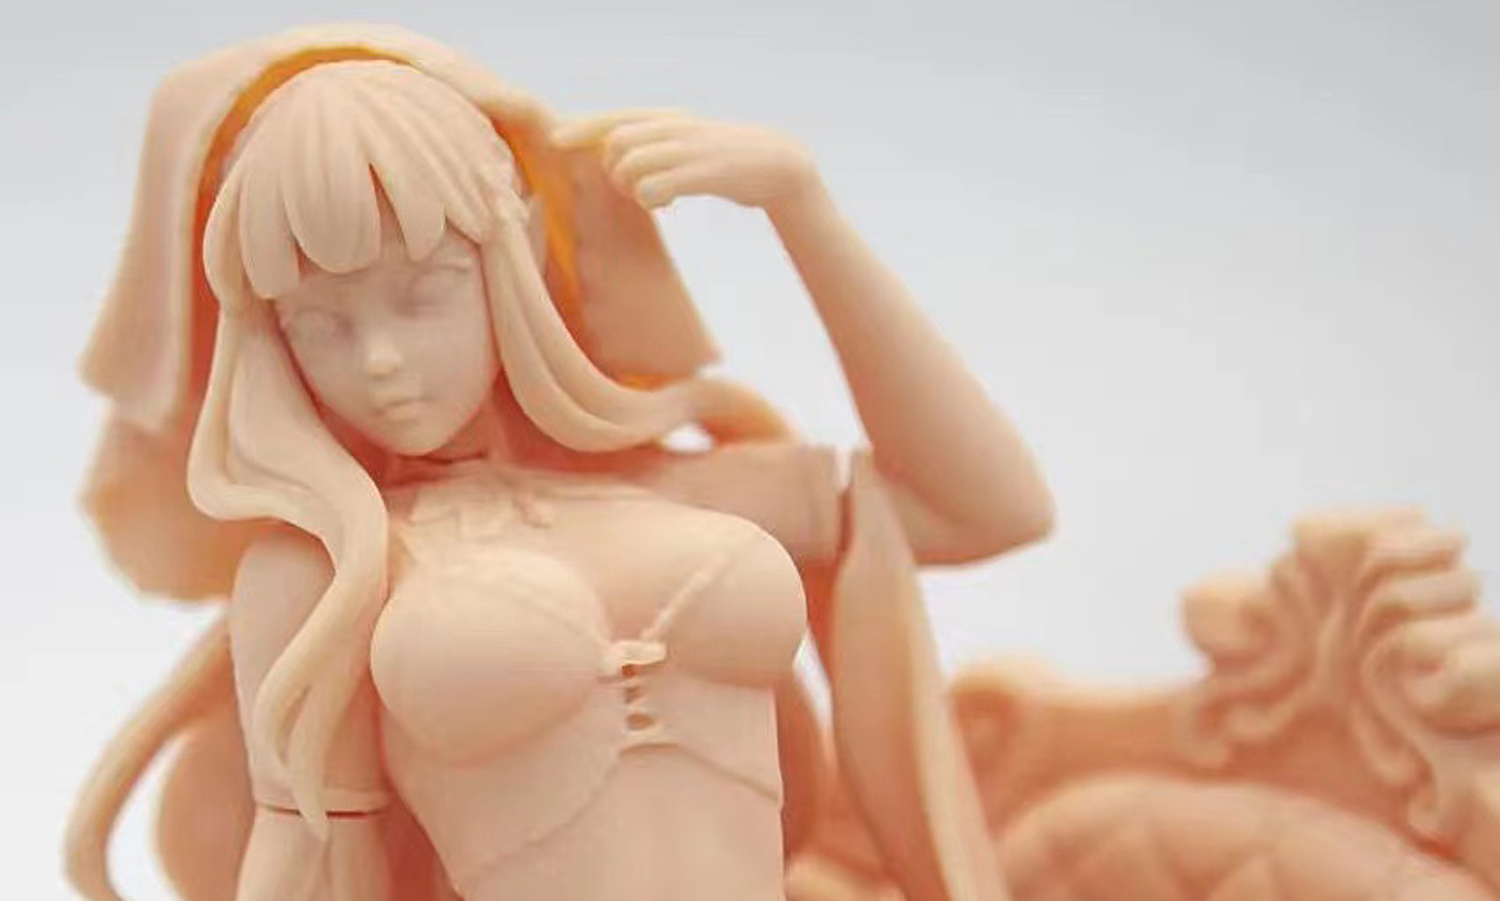 anime figure 3D Models to Print  yeggi  page 4